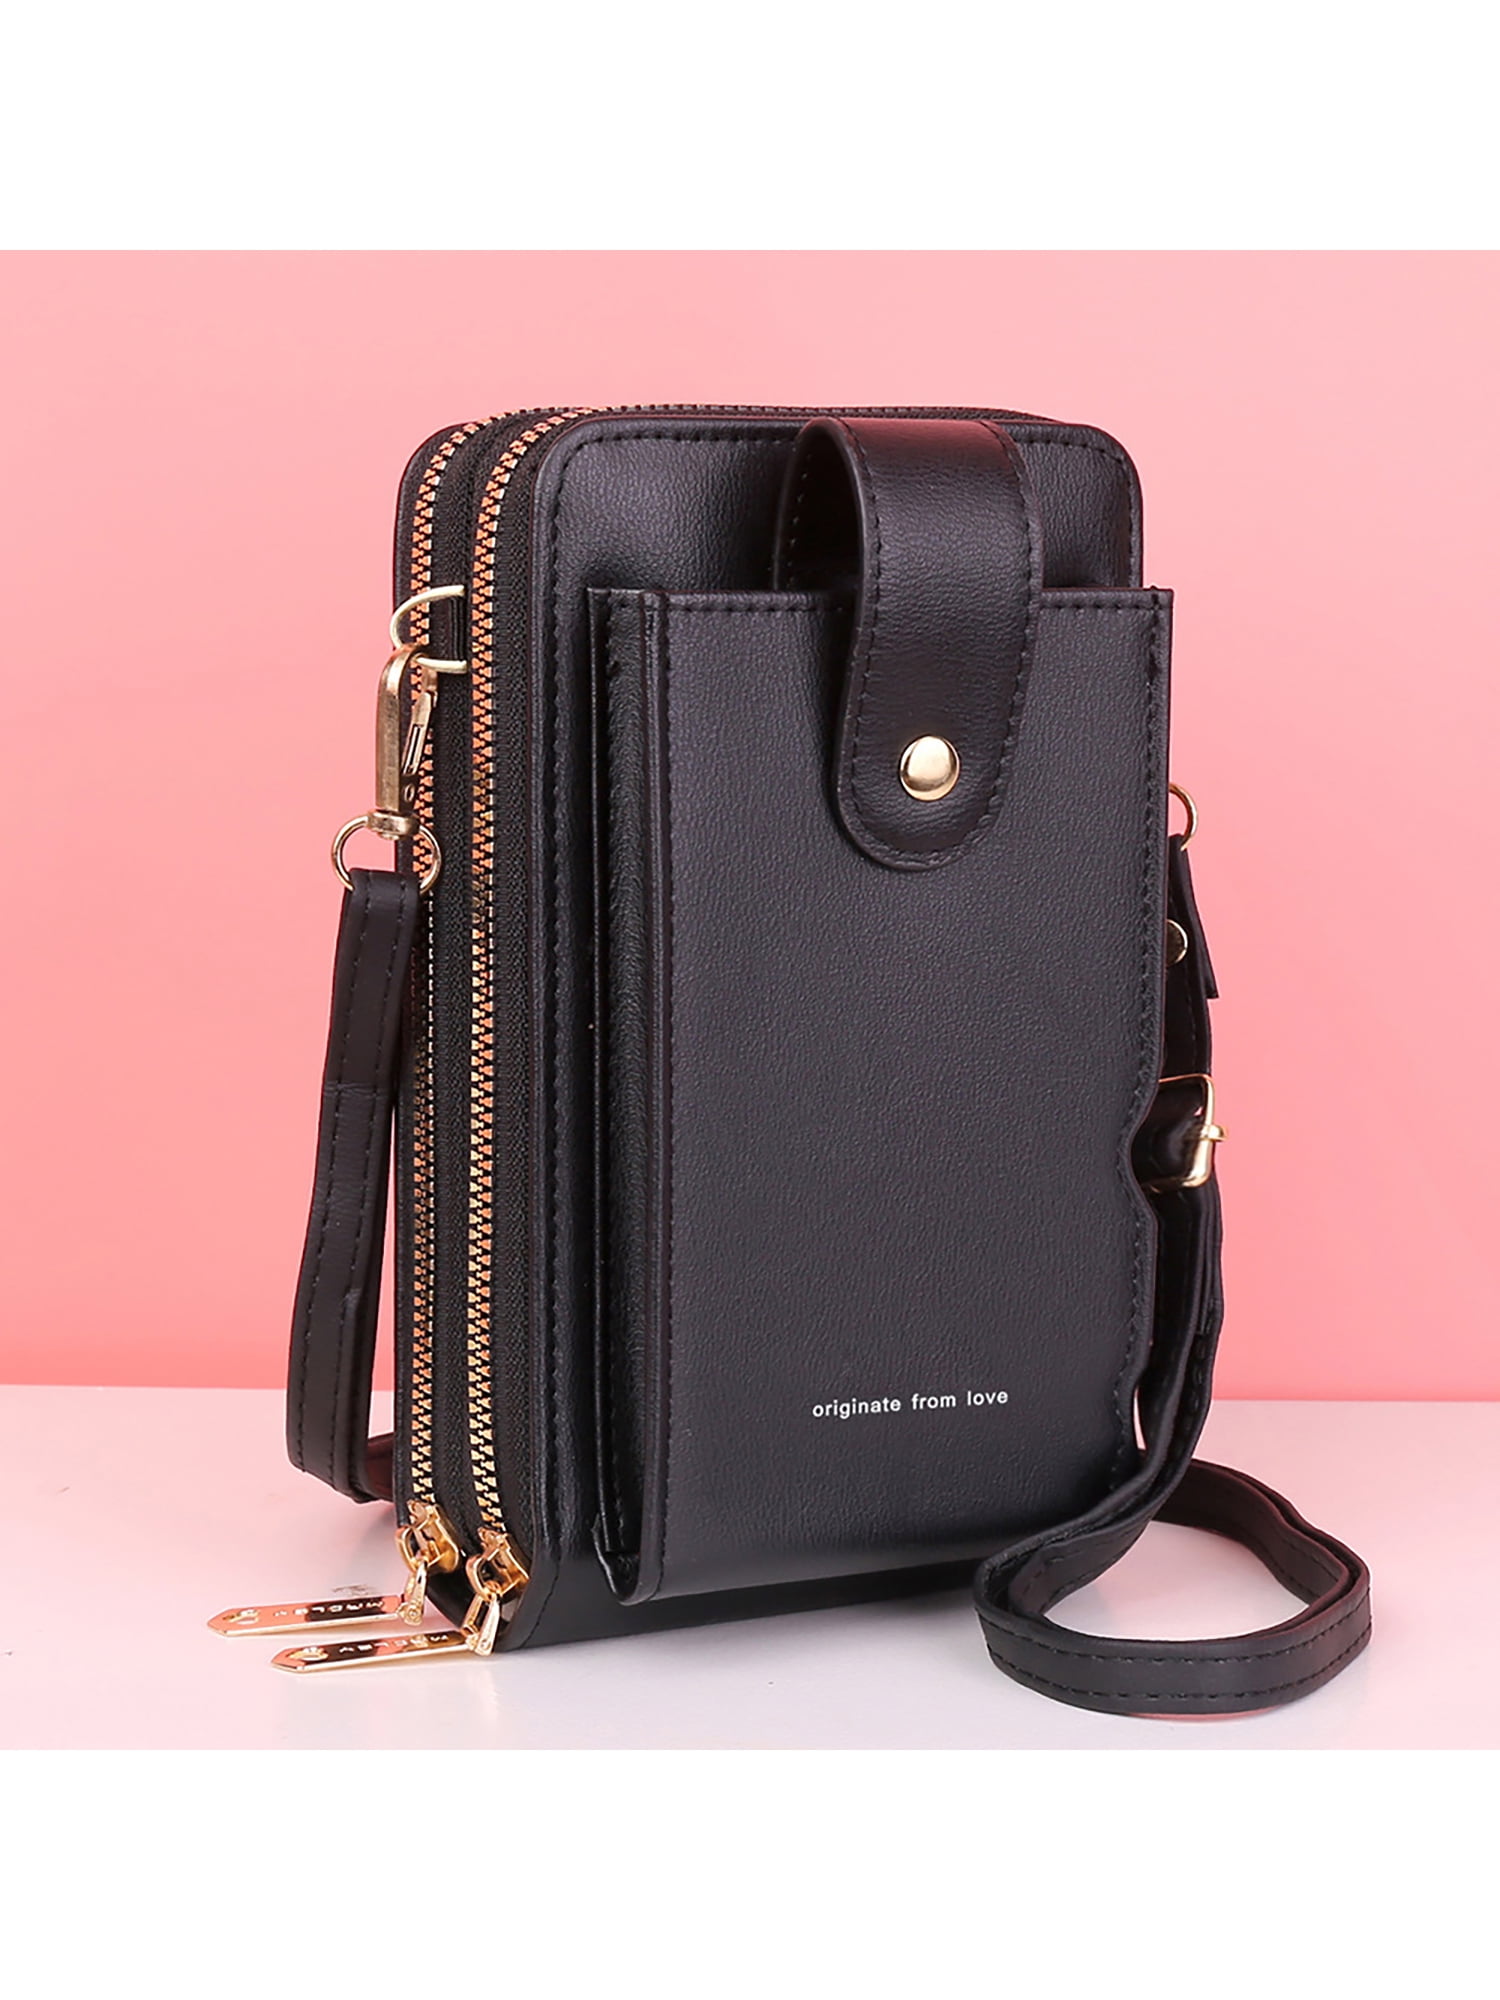 Up To 80% Off on Women Touch Screen Crossbody ... | Groupon Goods